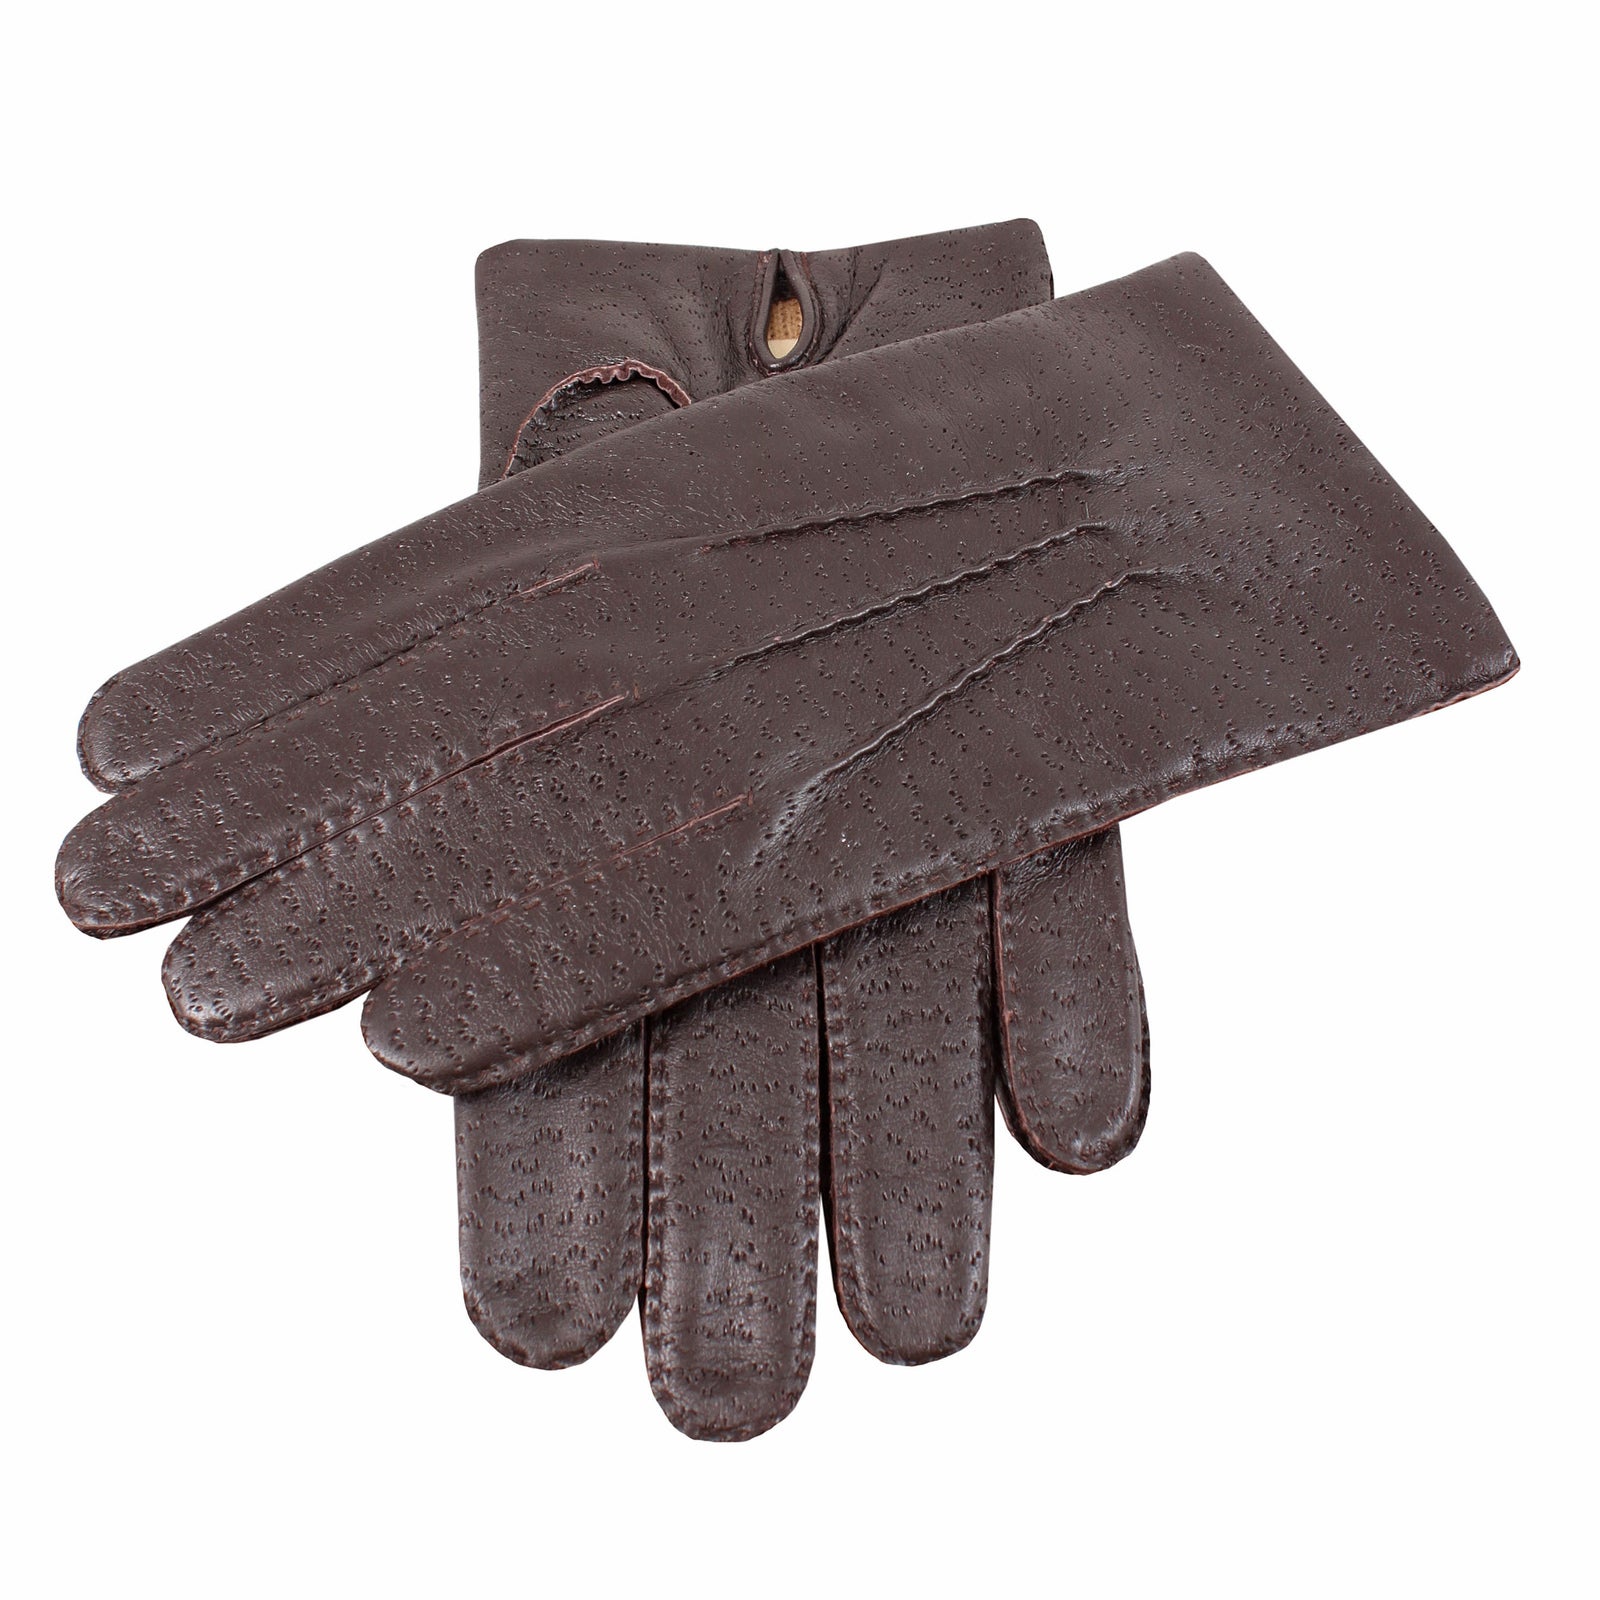 DENTS Mens Kent Perforated Leather Gloves With 3-Point Stitch Detail & Palm Vent